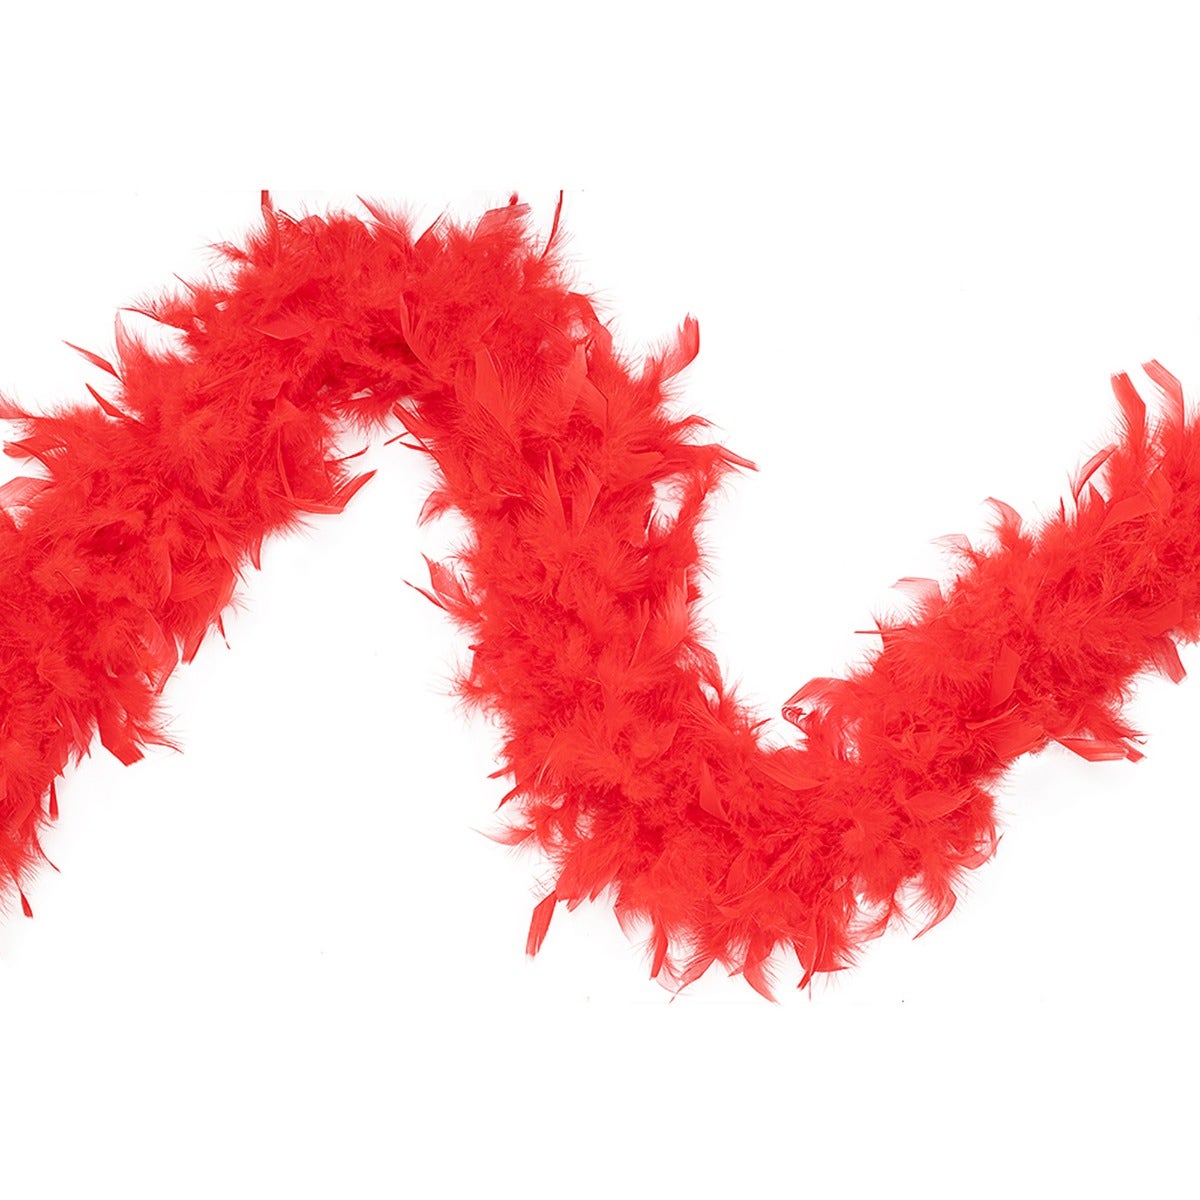 Chandelle Feather Boa - Medium Weight - Red